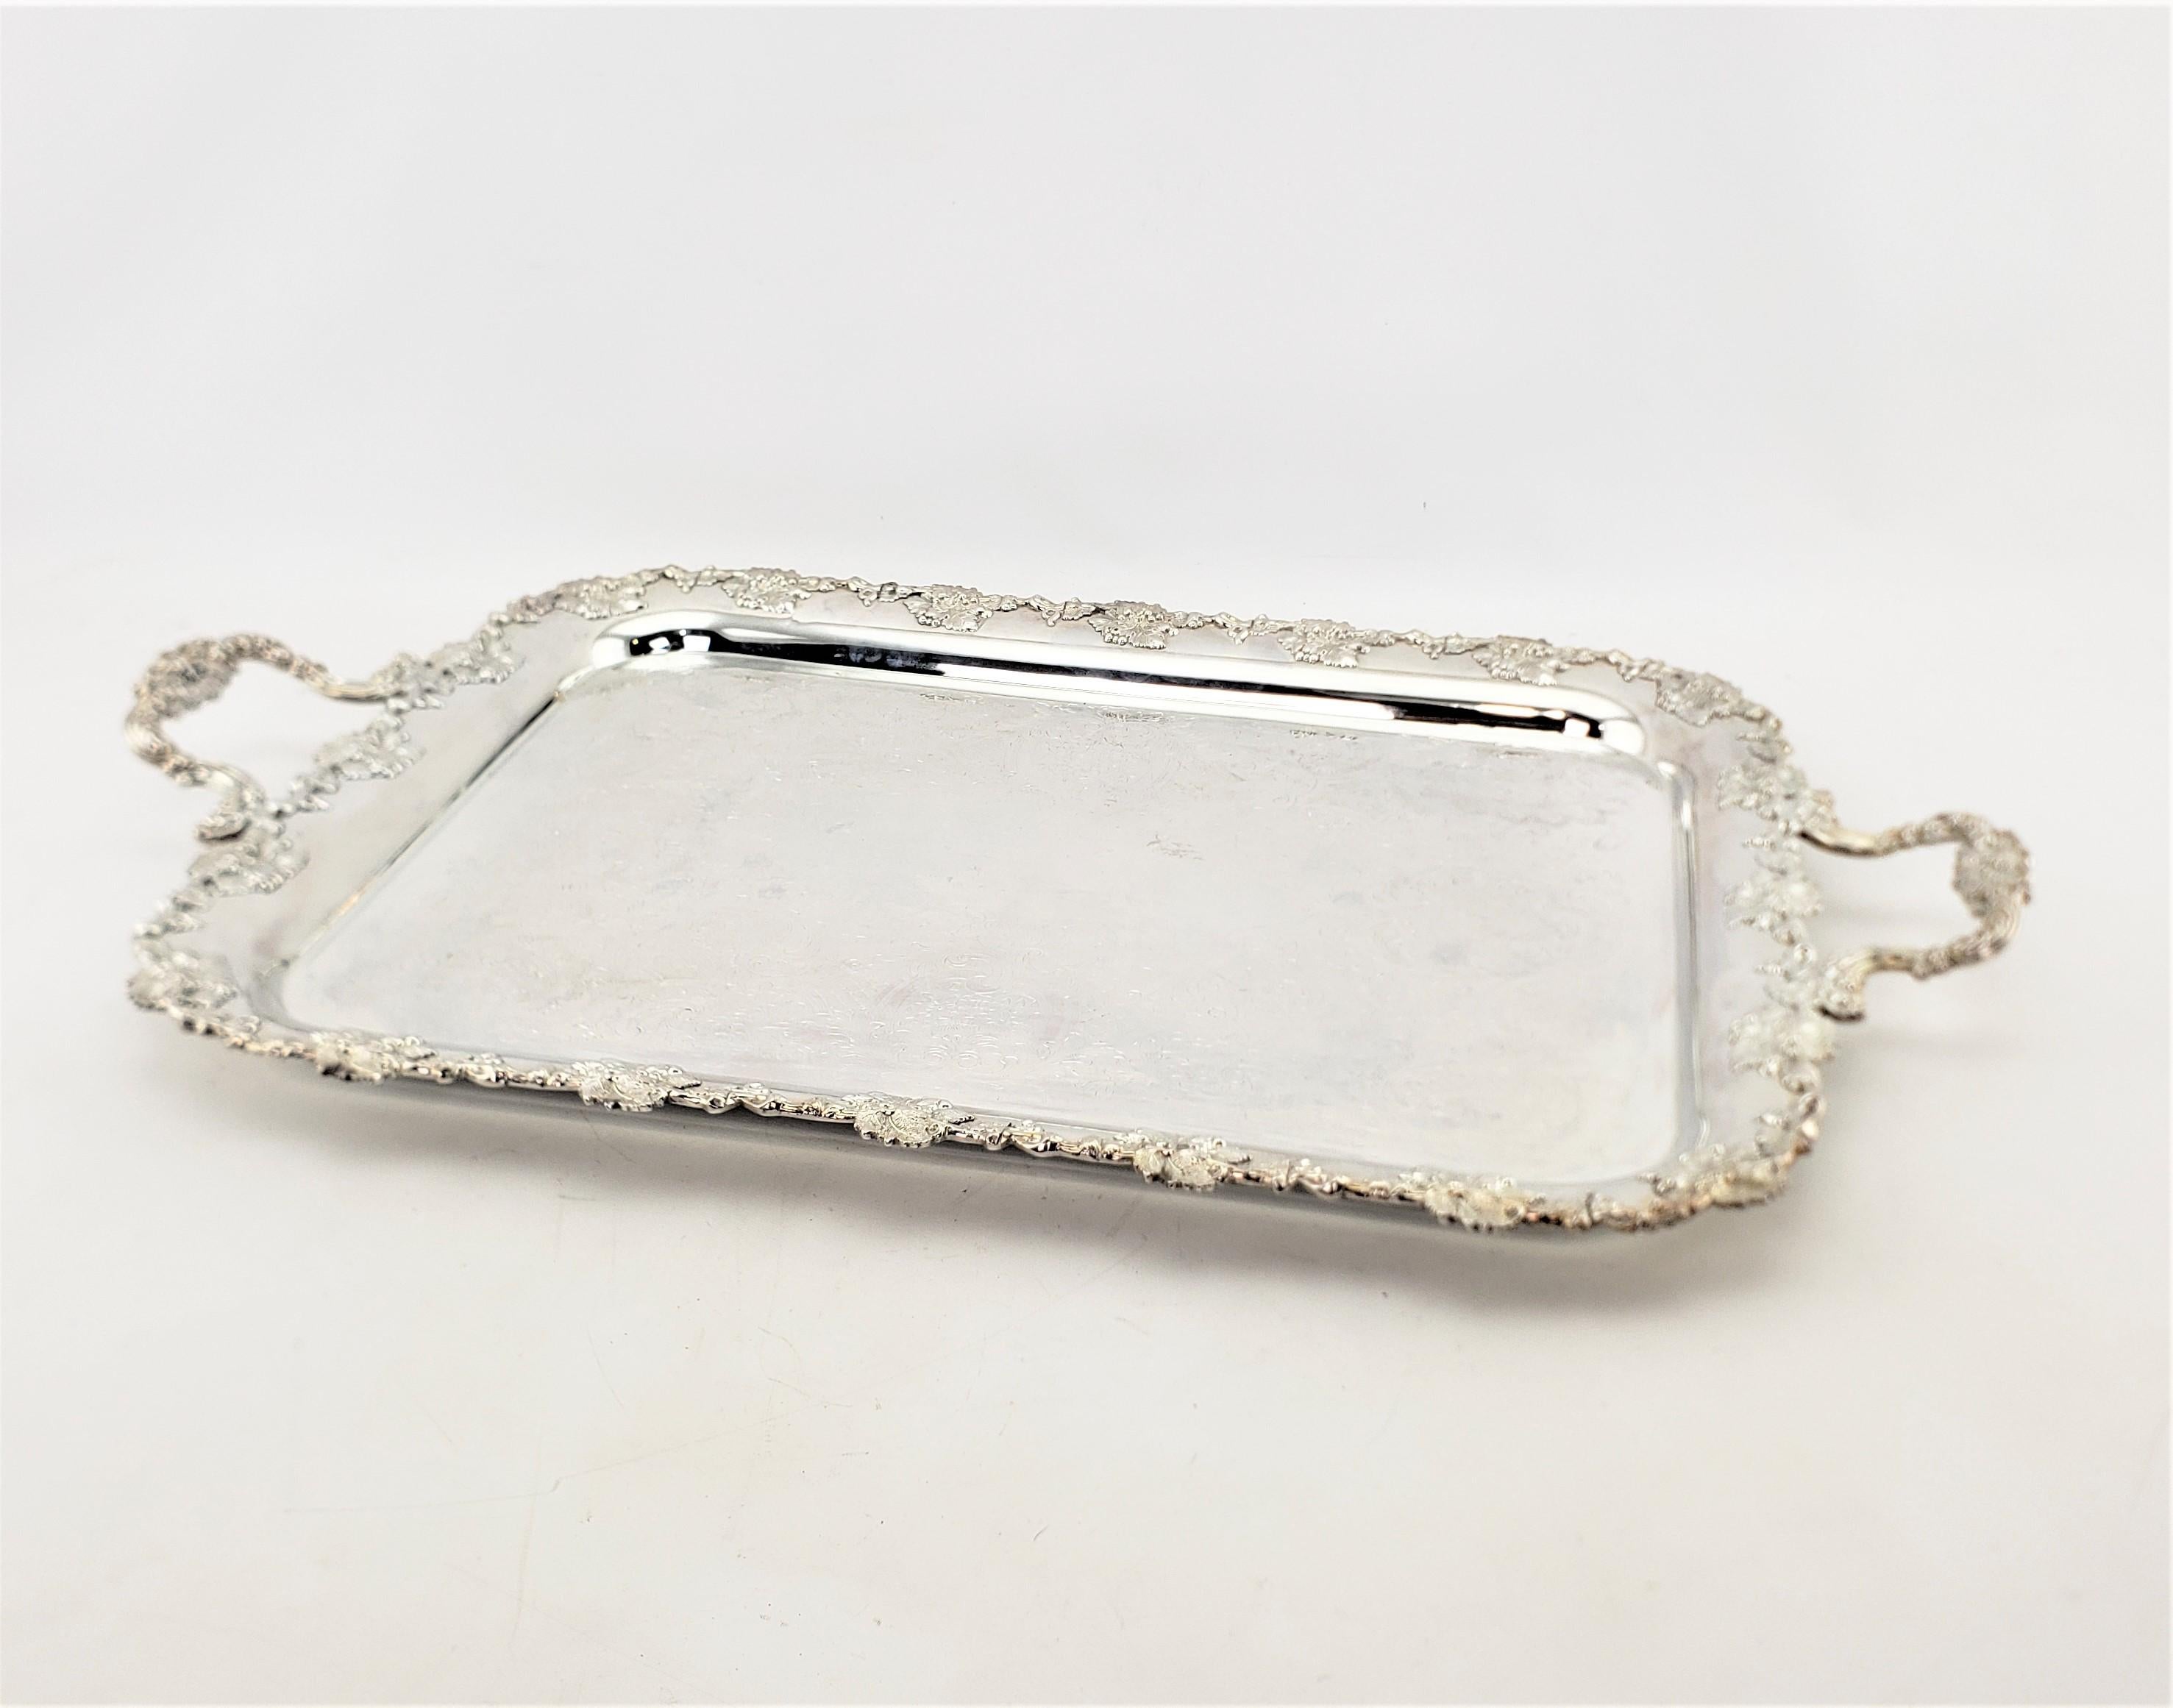 This large silver plated serving tray was made by the renowned Barker-Ellis Silver Co. of England in approximately 1890 in the period Victorian style. The tray is ornately decorated on the borders with applied leaves and berries, which is accented